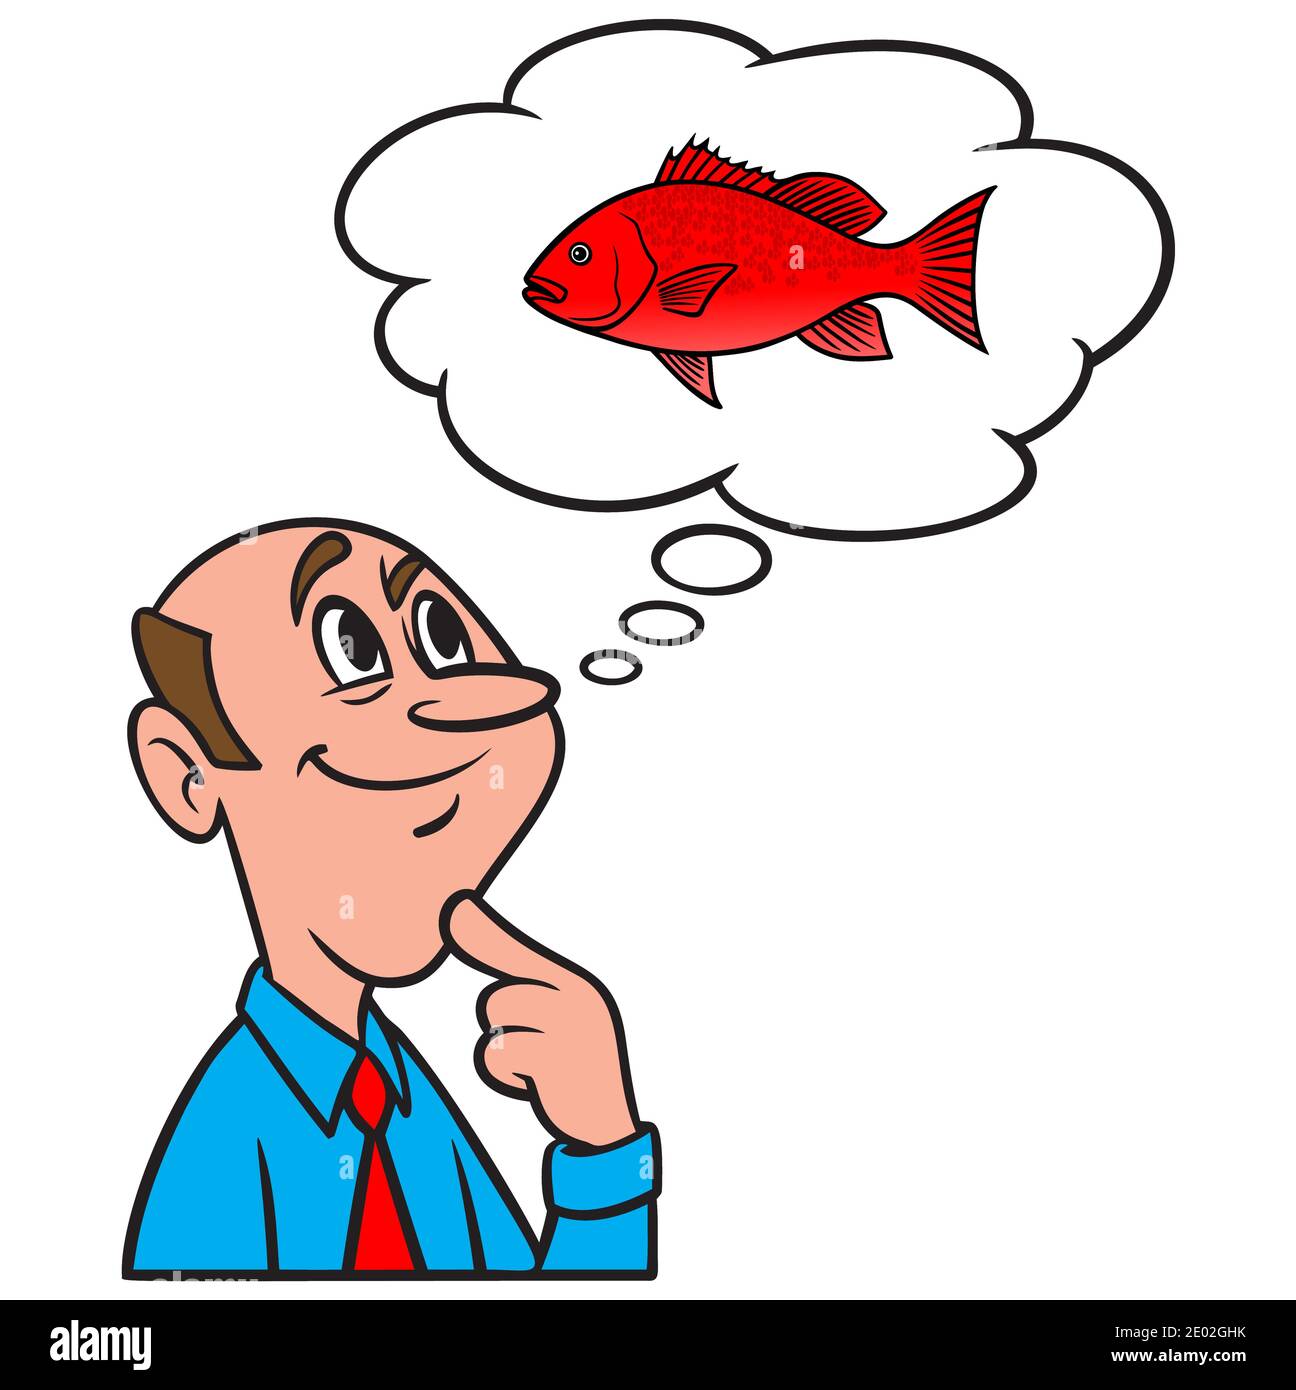 Thinking about fishing for Red Snapper - A cartoon illustration of a man thinking about fishing for Red Snapper. Stock Vector